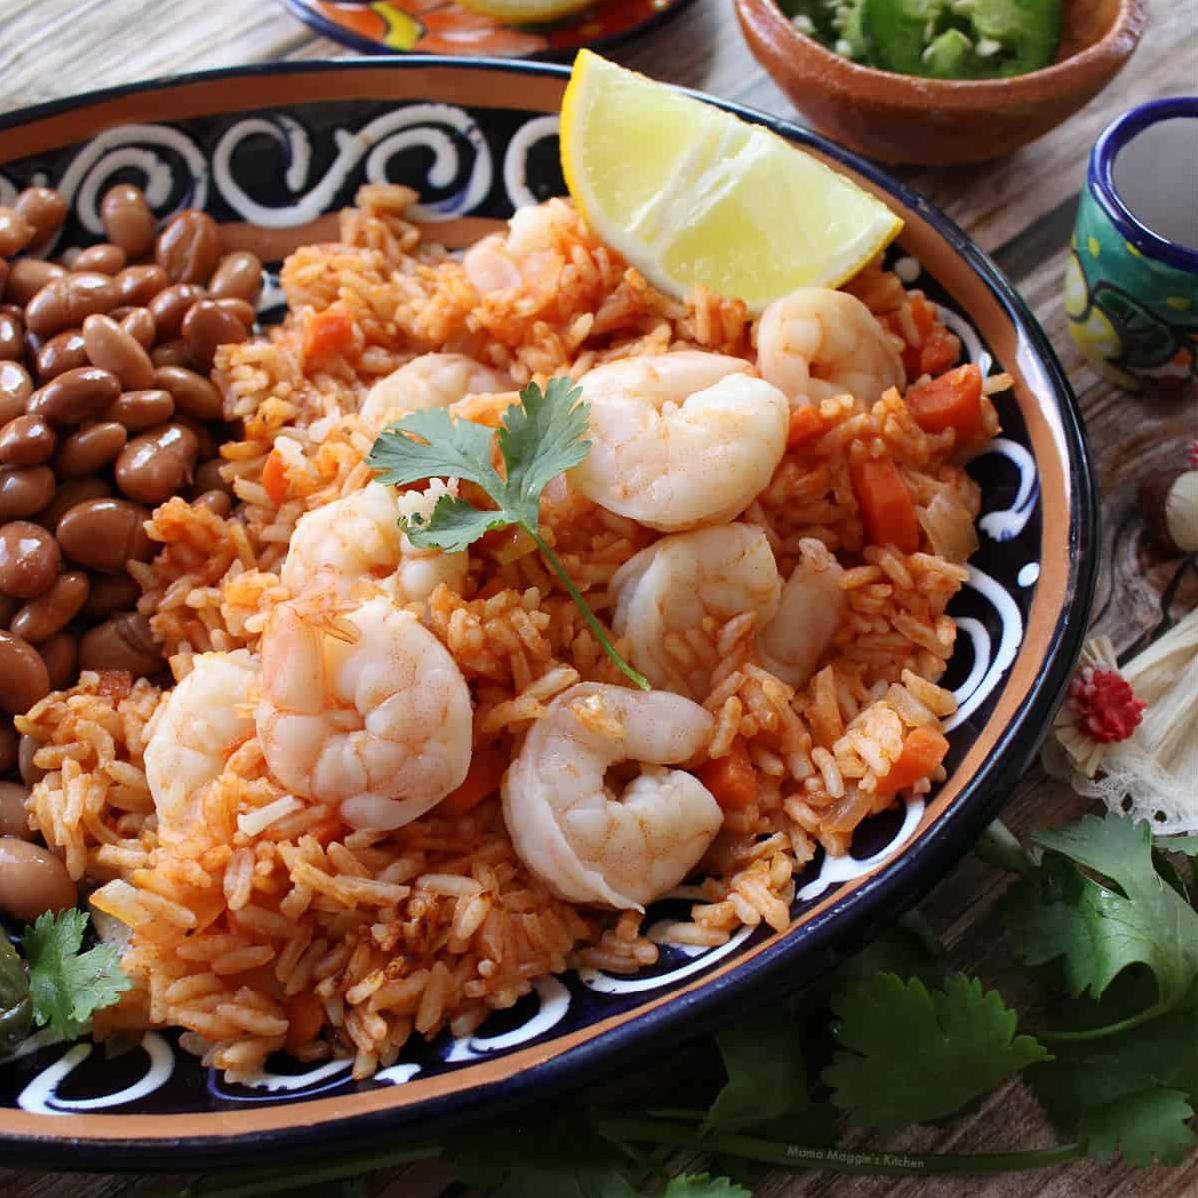  An explosion of flavors from the juicy shrimp and aromatic rice